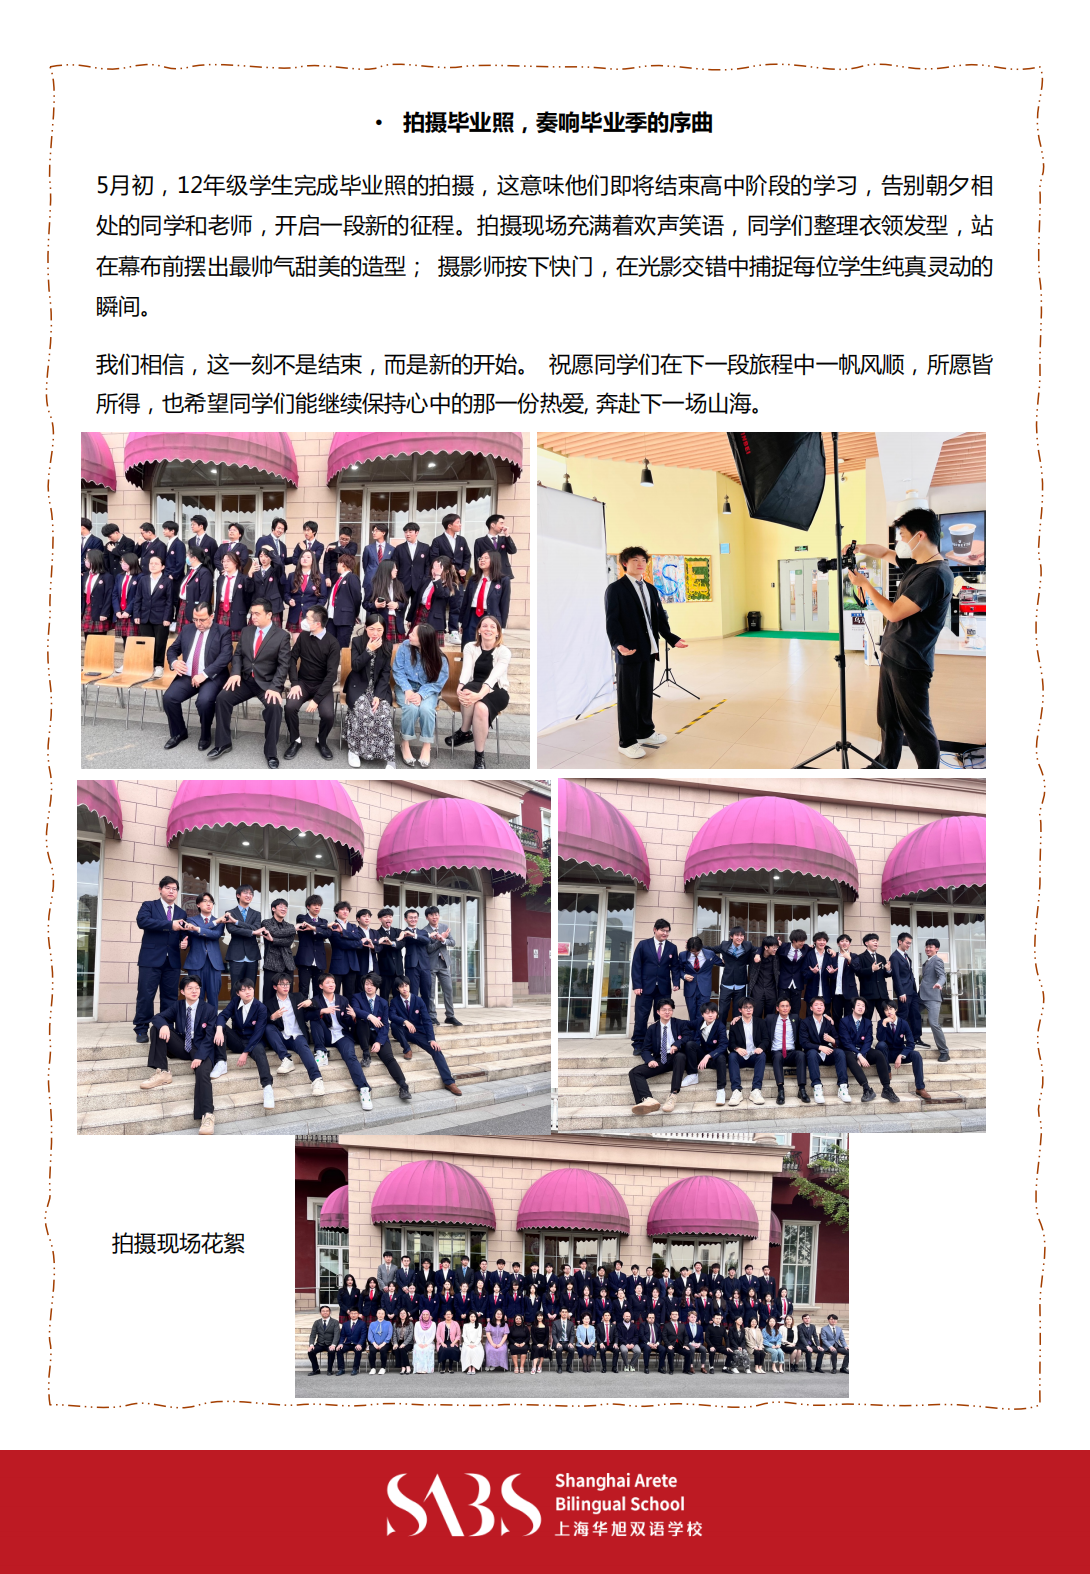 HS 7th Issue Newsletter pptx（Chinese）_02.png